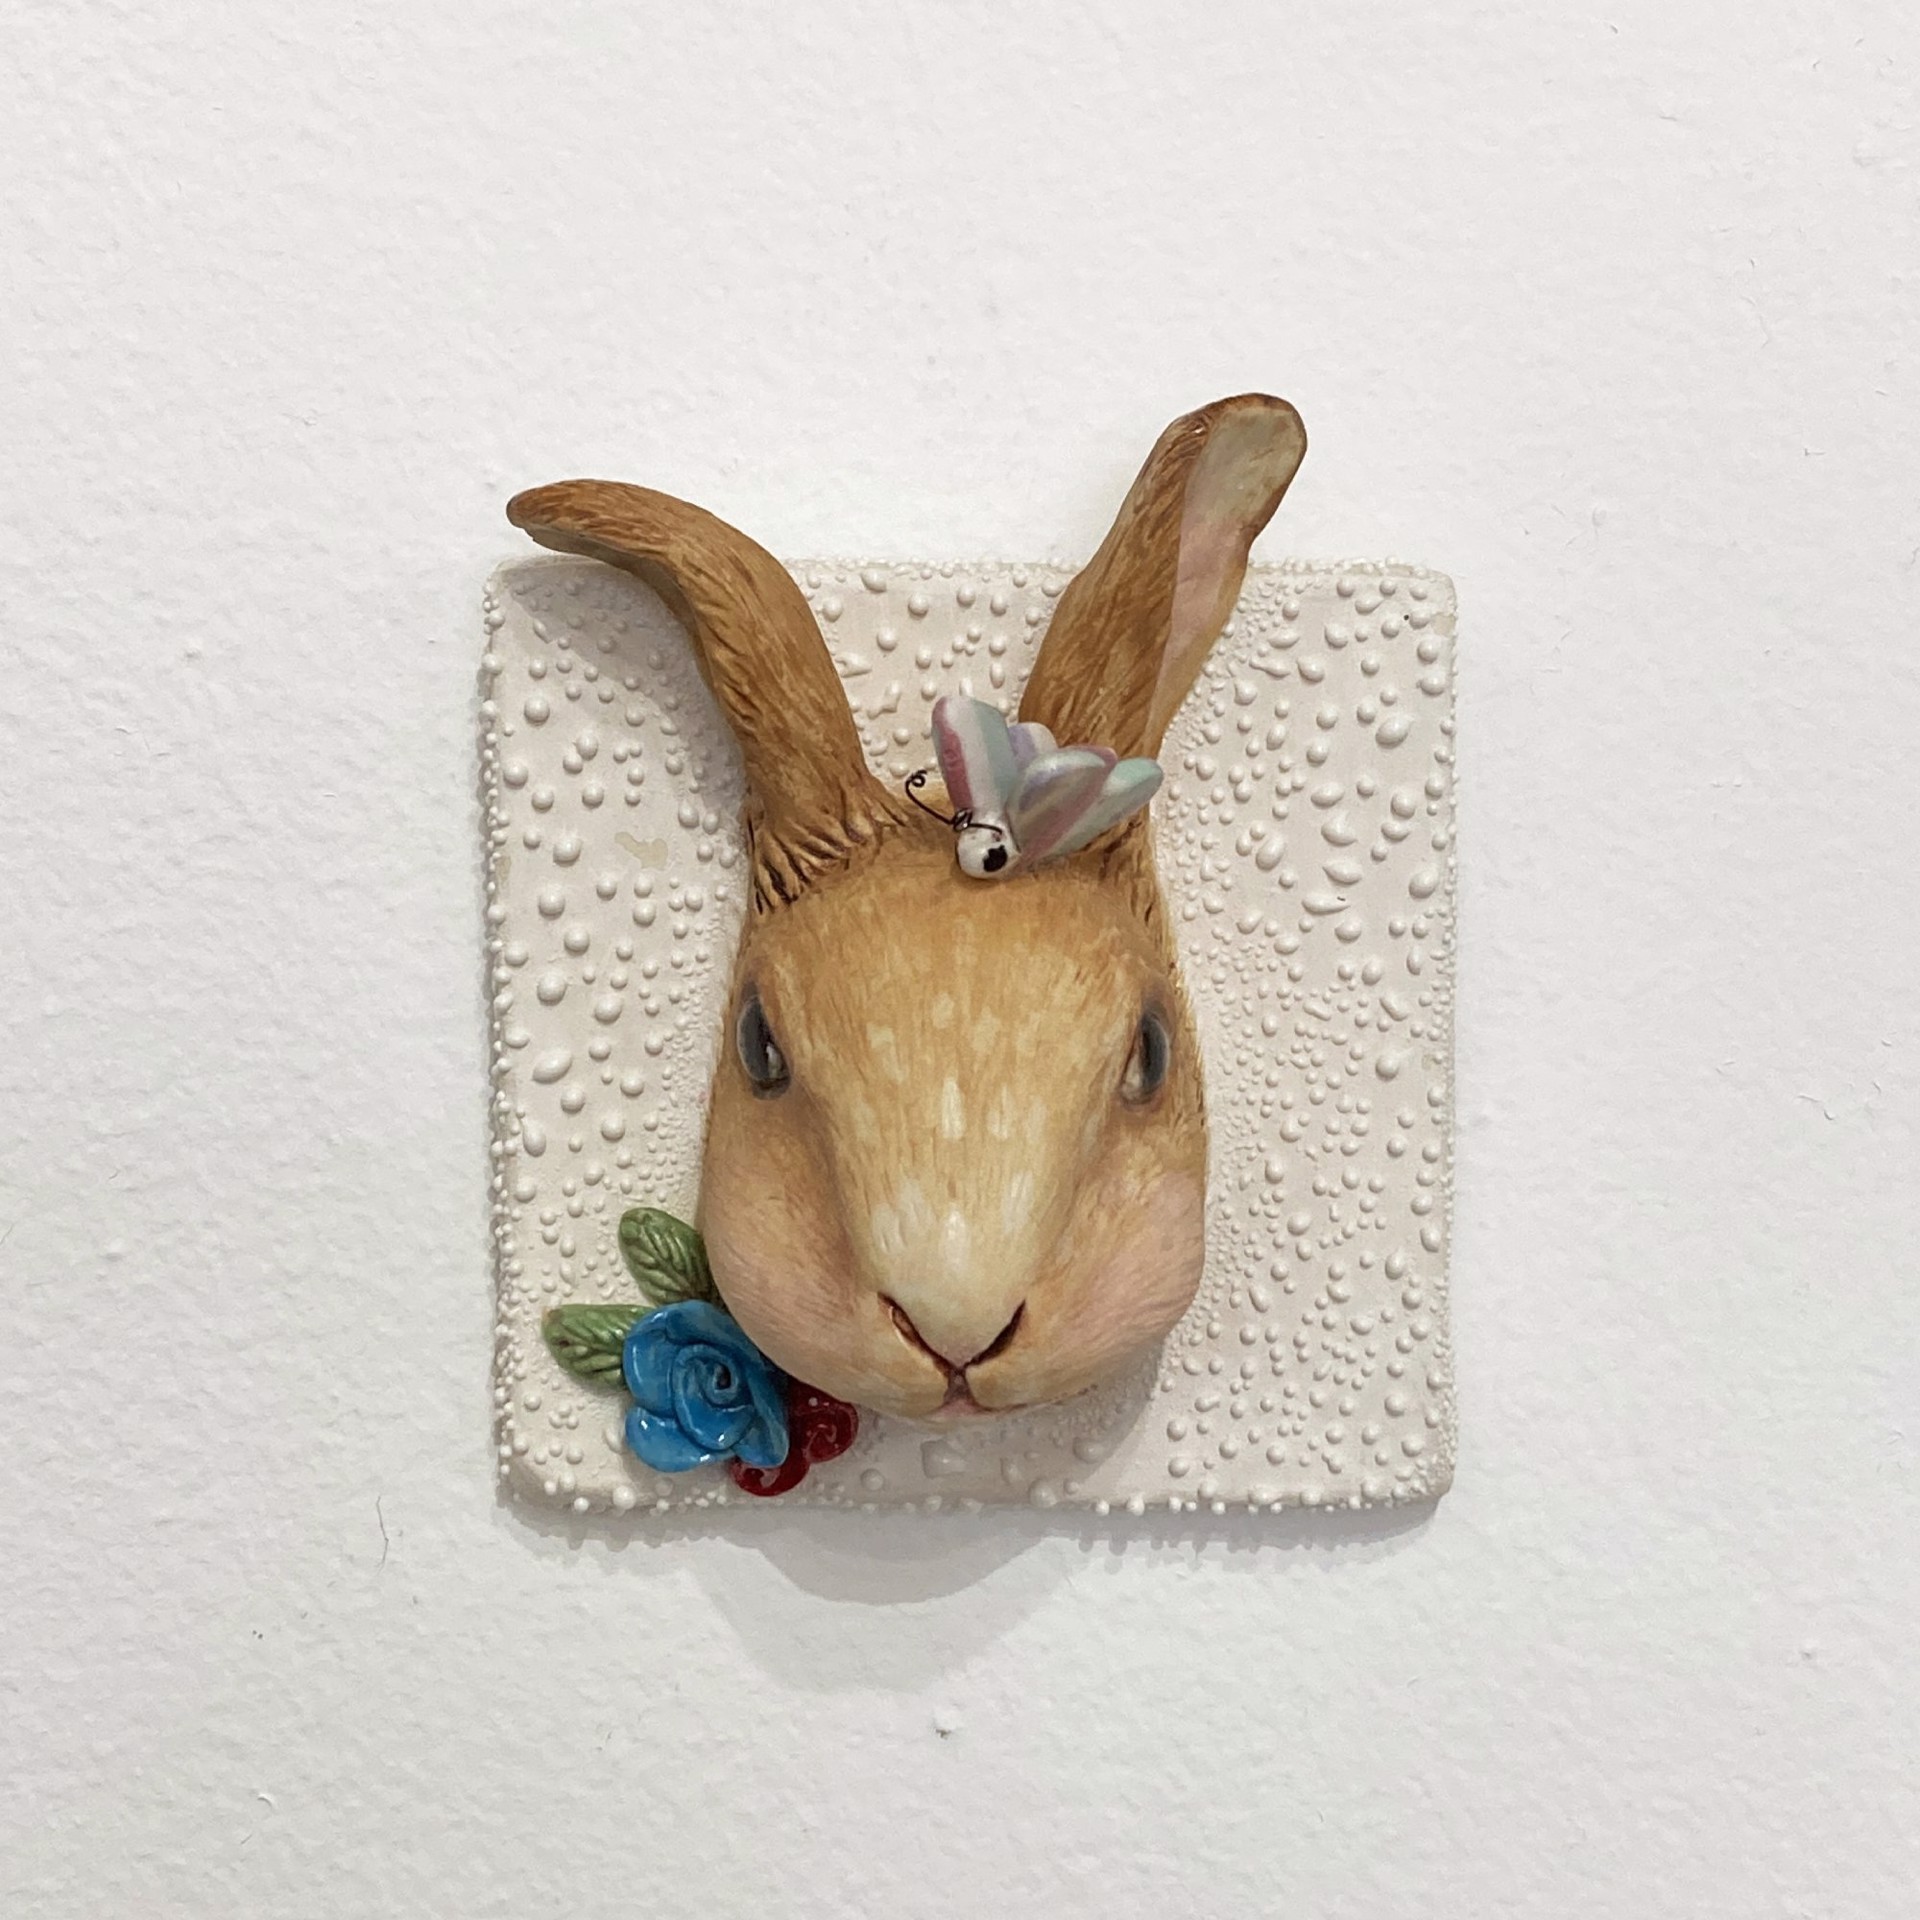 Pet Tile Bunny by Rumi Poling